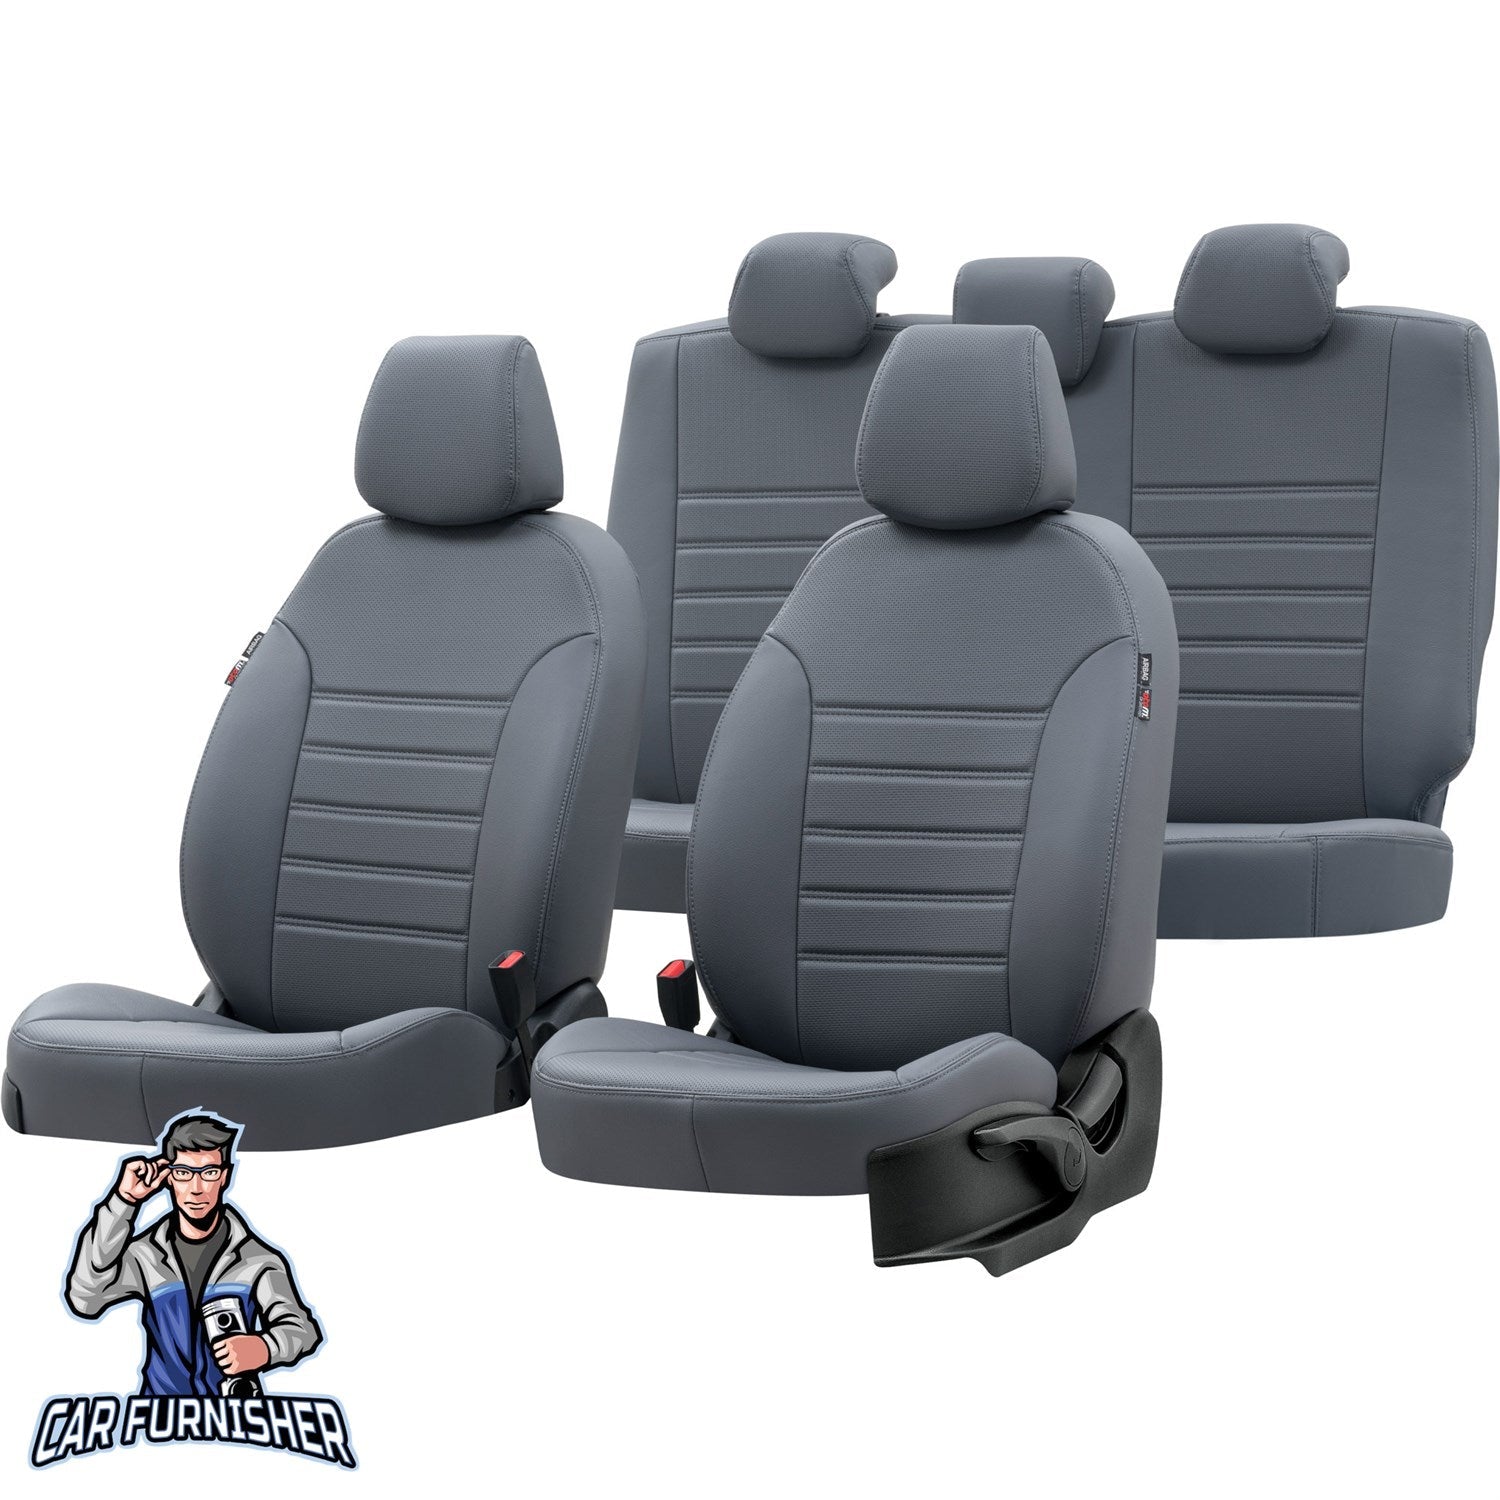 Volvo S60 Car Seat Cover 2000-2018 T4/T5/T6/T8/D5 New York Design Smoked Full Set (5 Seats + Handrest) Leather & Fabric